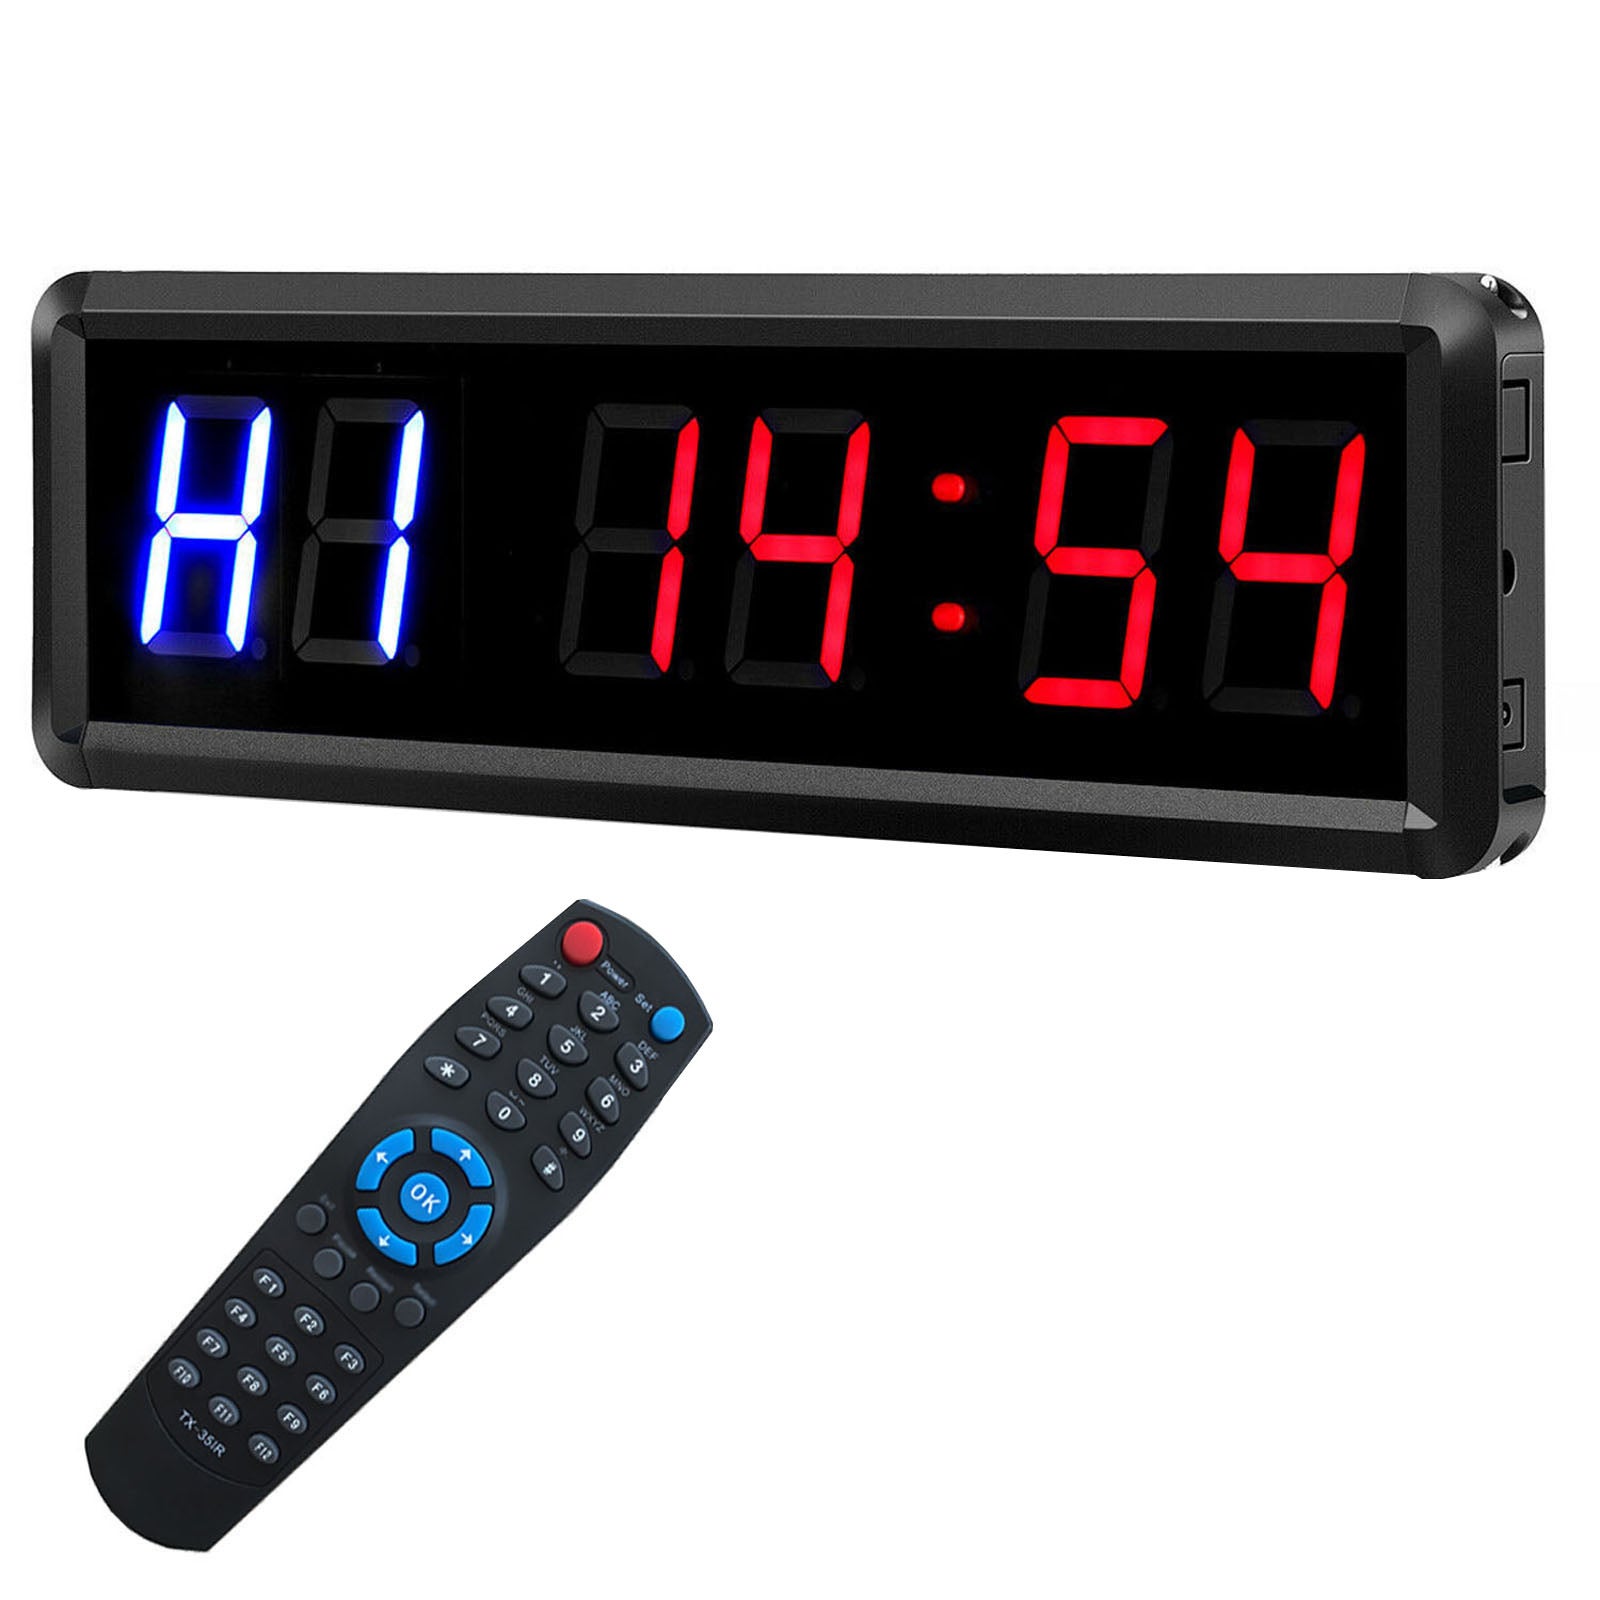 TODO 1.5" Digital Countdown Timer LED Interval Timer Clock Remote crossfit Gym MMA Fitness